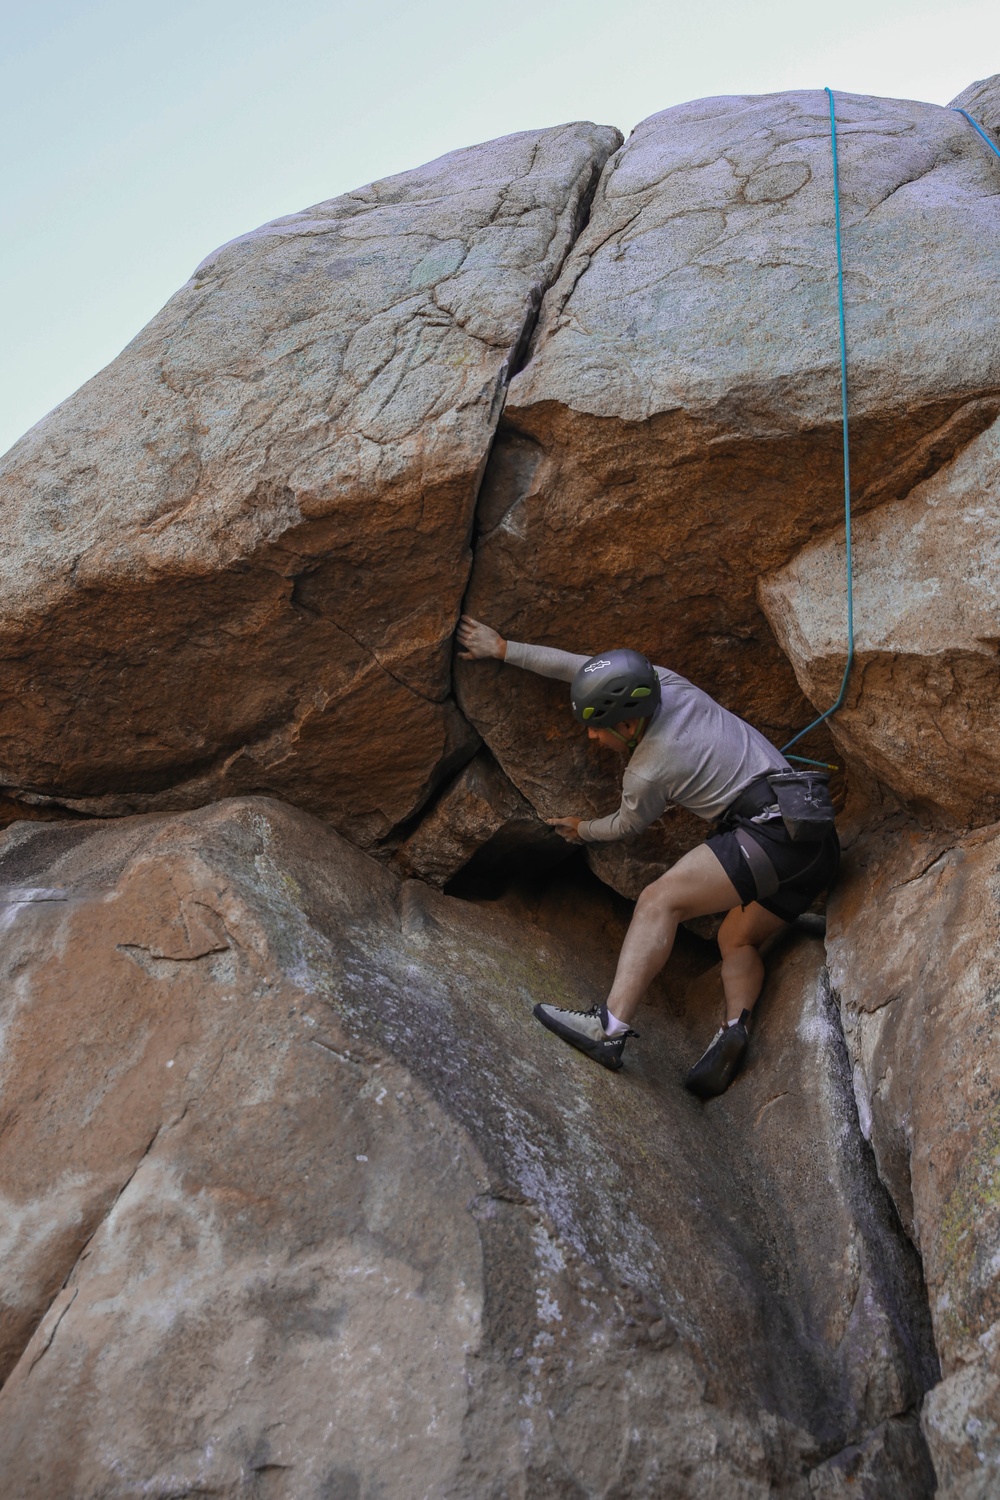 Marines with 1st Transportation Battalion Try Rock Climbing